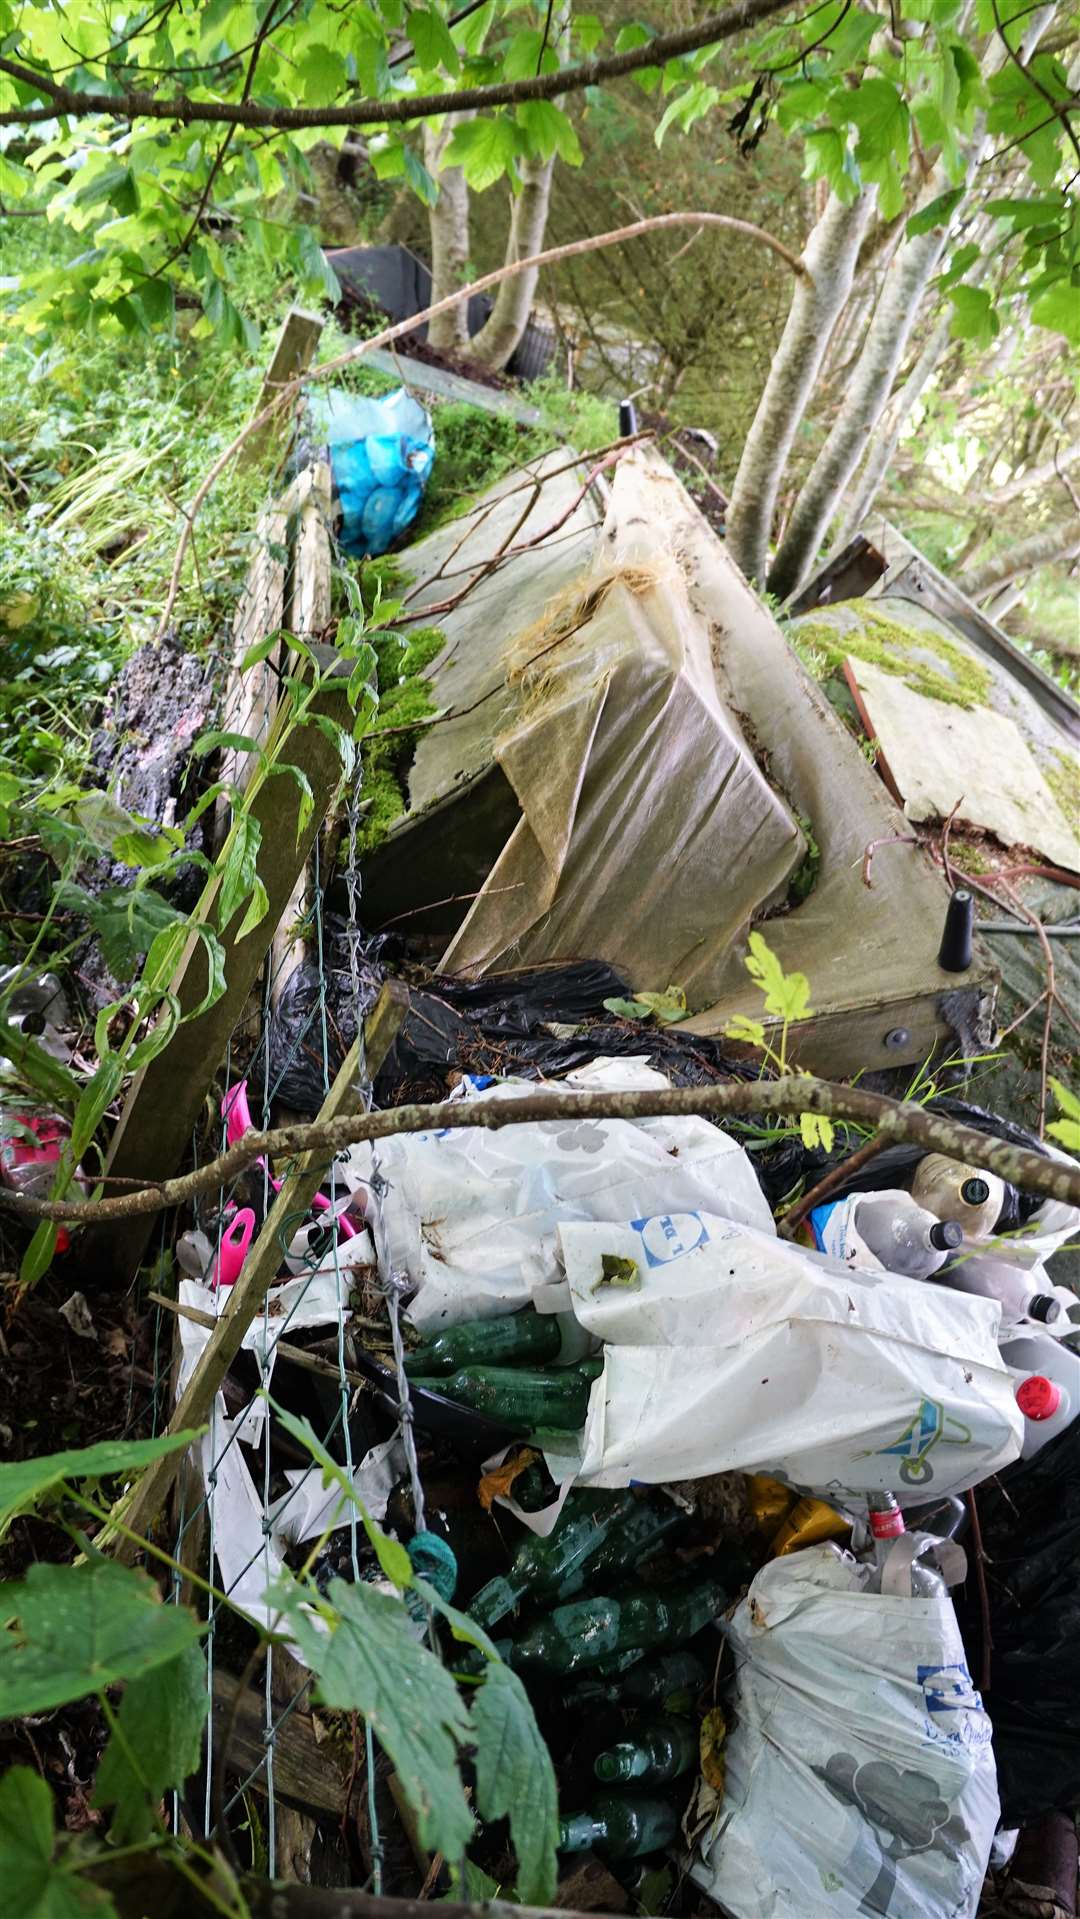 Historic fly-tipped articles lie further behind the properties and appear to have lain there for a number of years.